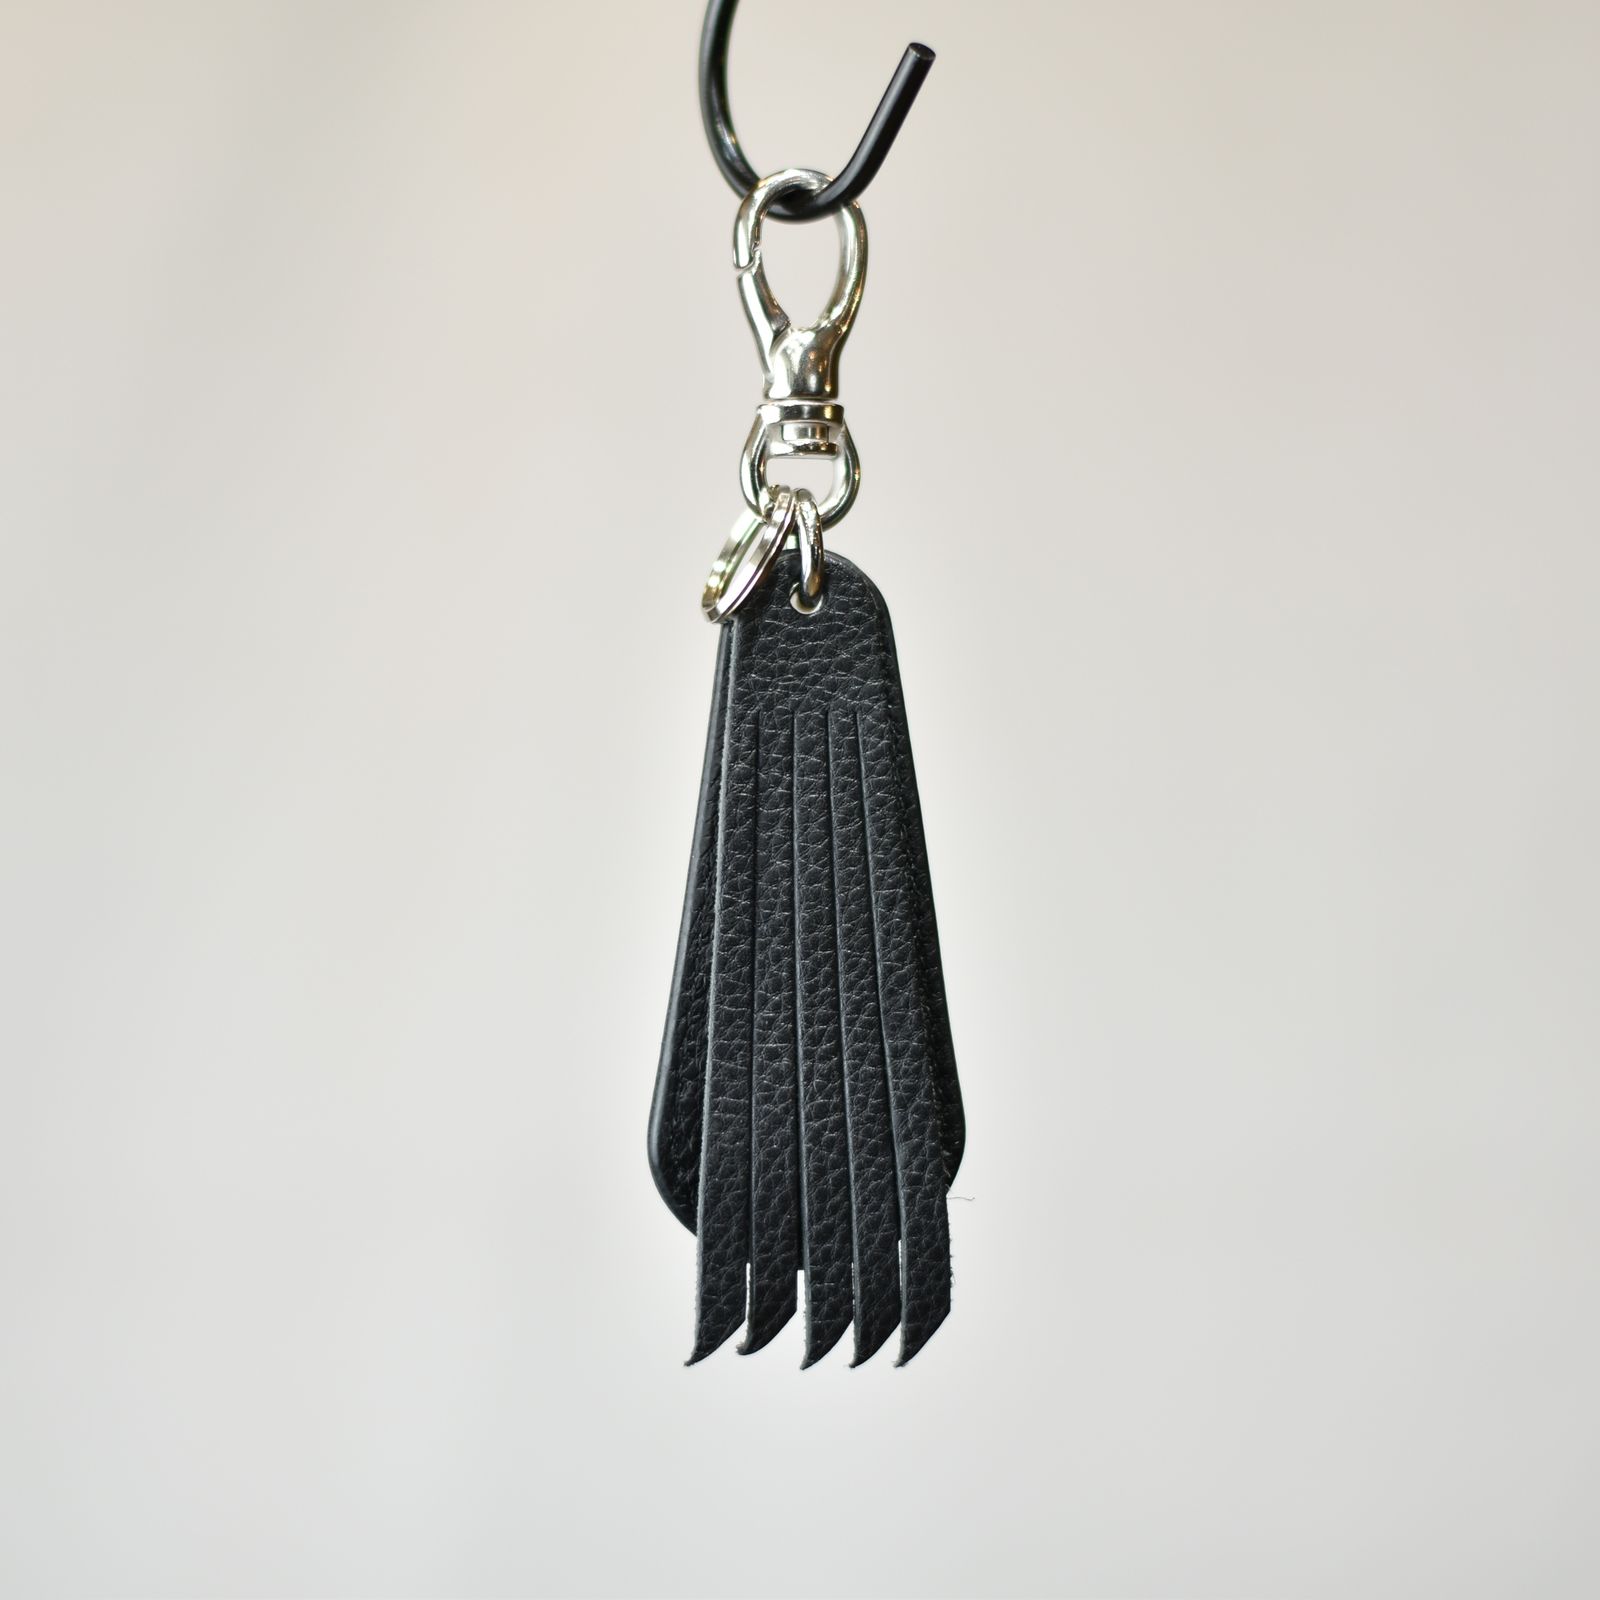 CALEE - Studs & Embossing assort leather key ring -Type D- (Black 